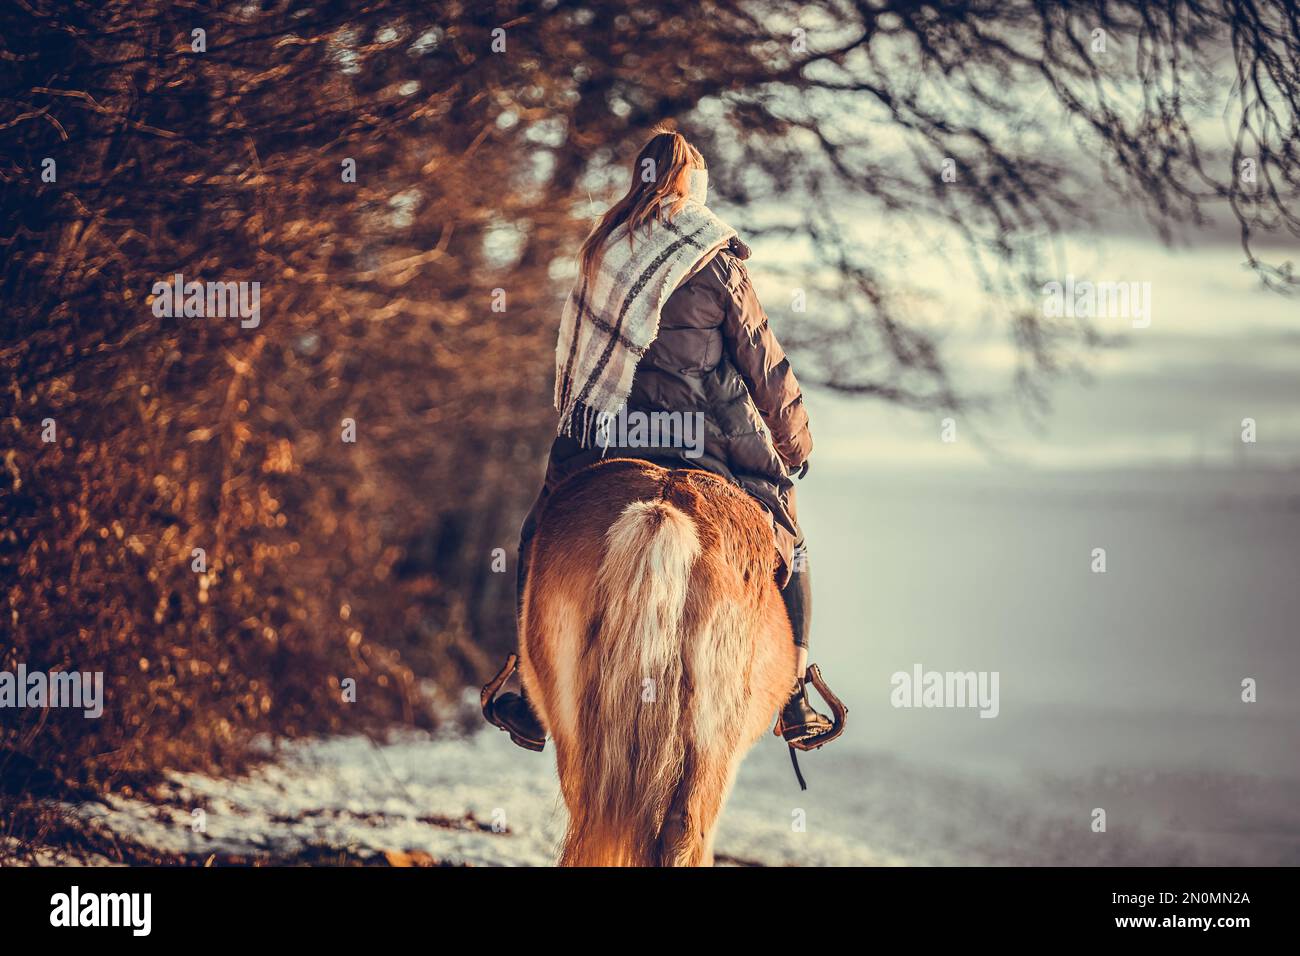 A young equestrian teenage girl rides on her haflinger horse through the snow in the evening during sundown in front of a snowy rural winter landscape Stock Photo